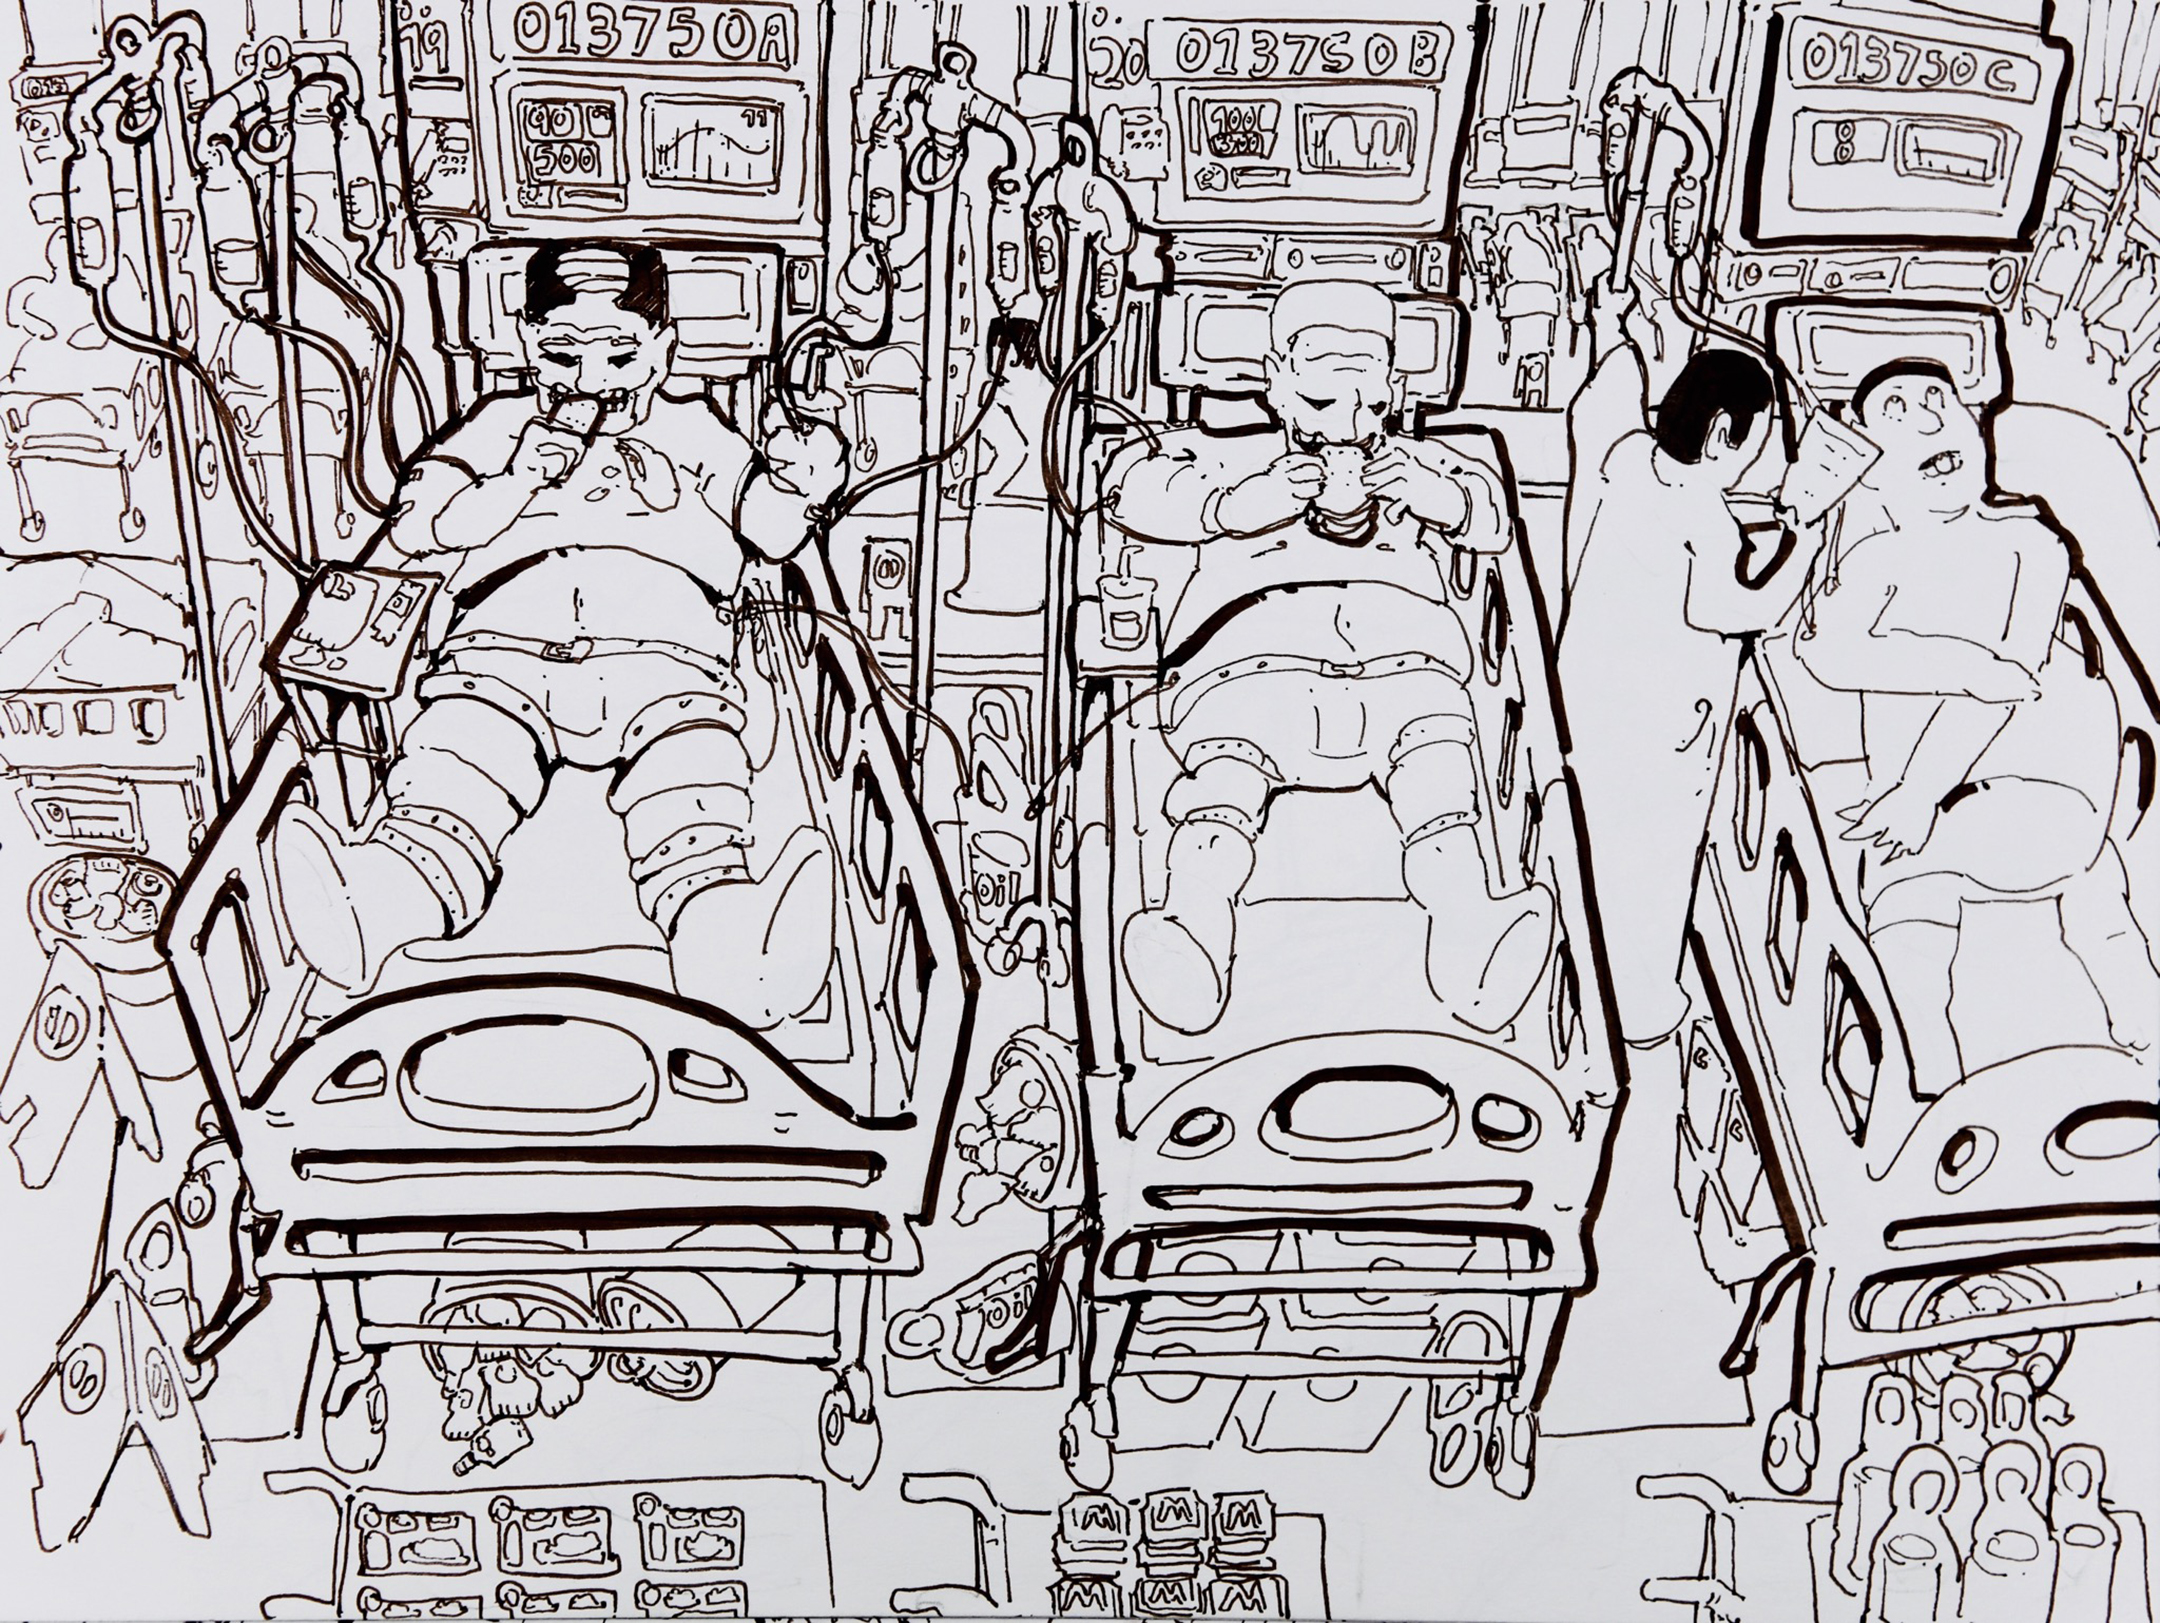 Black and white drawing of three men in hospital beds hooked up to machines